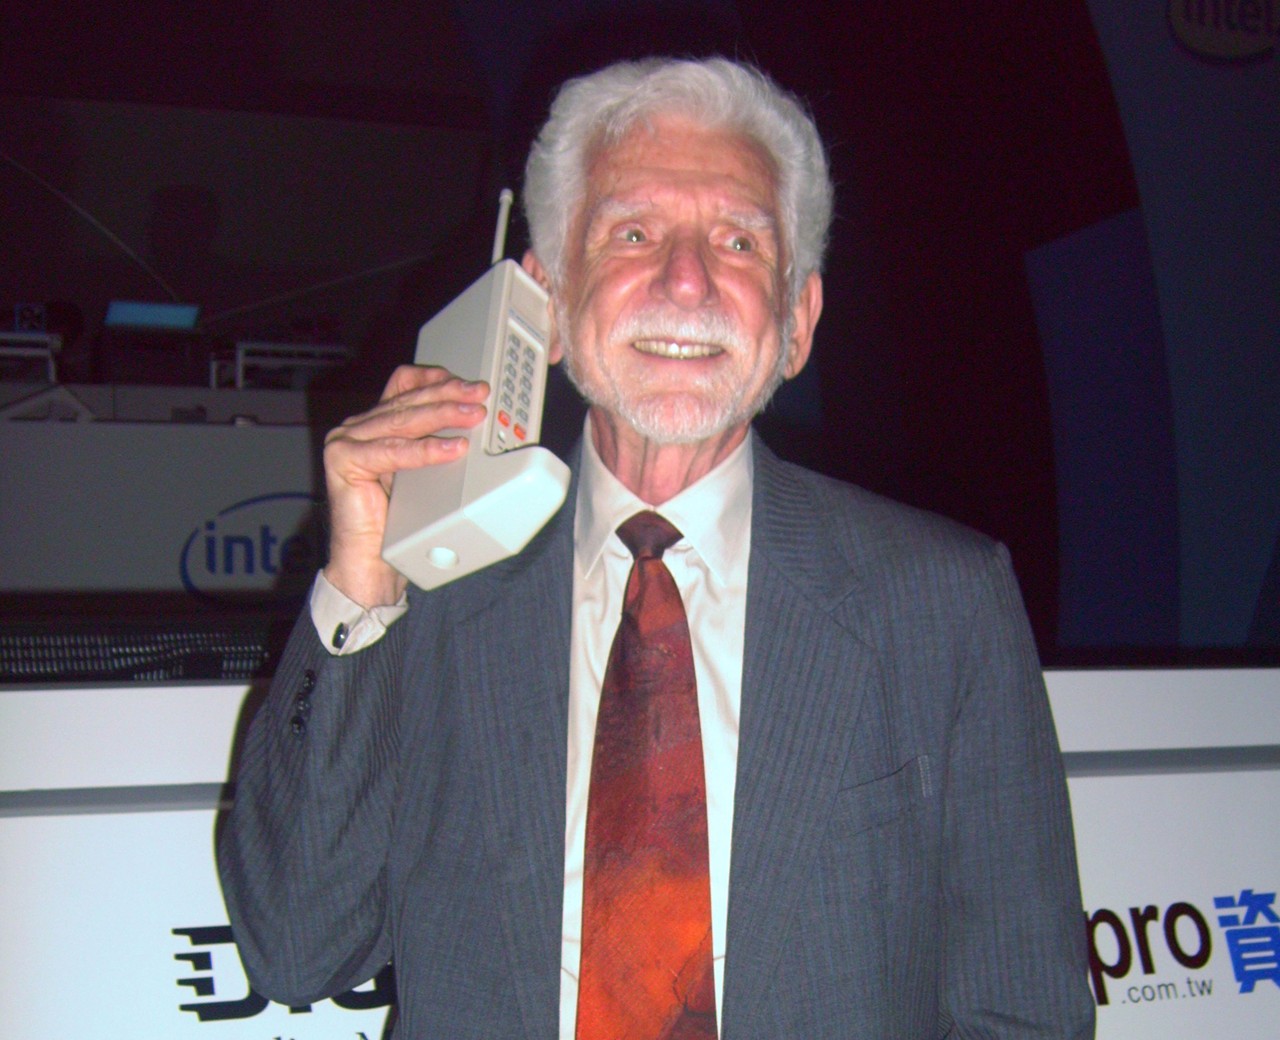 The first commercial wireless call was made.
The Motorola DynaTAC 8000X was approved by the FCC in September of 1983. The early mobile phones allowed for 30 minutes of talk time and took about 10 hours to charge.